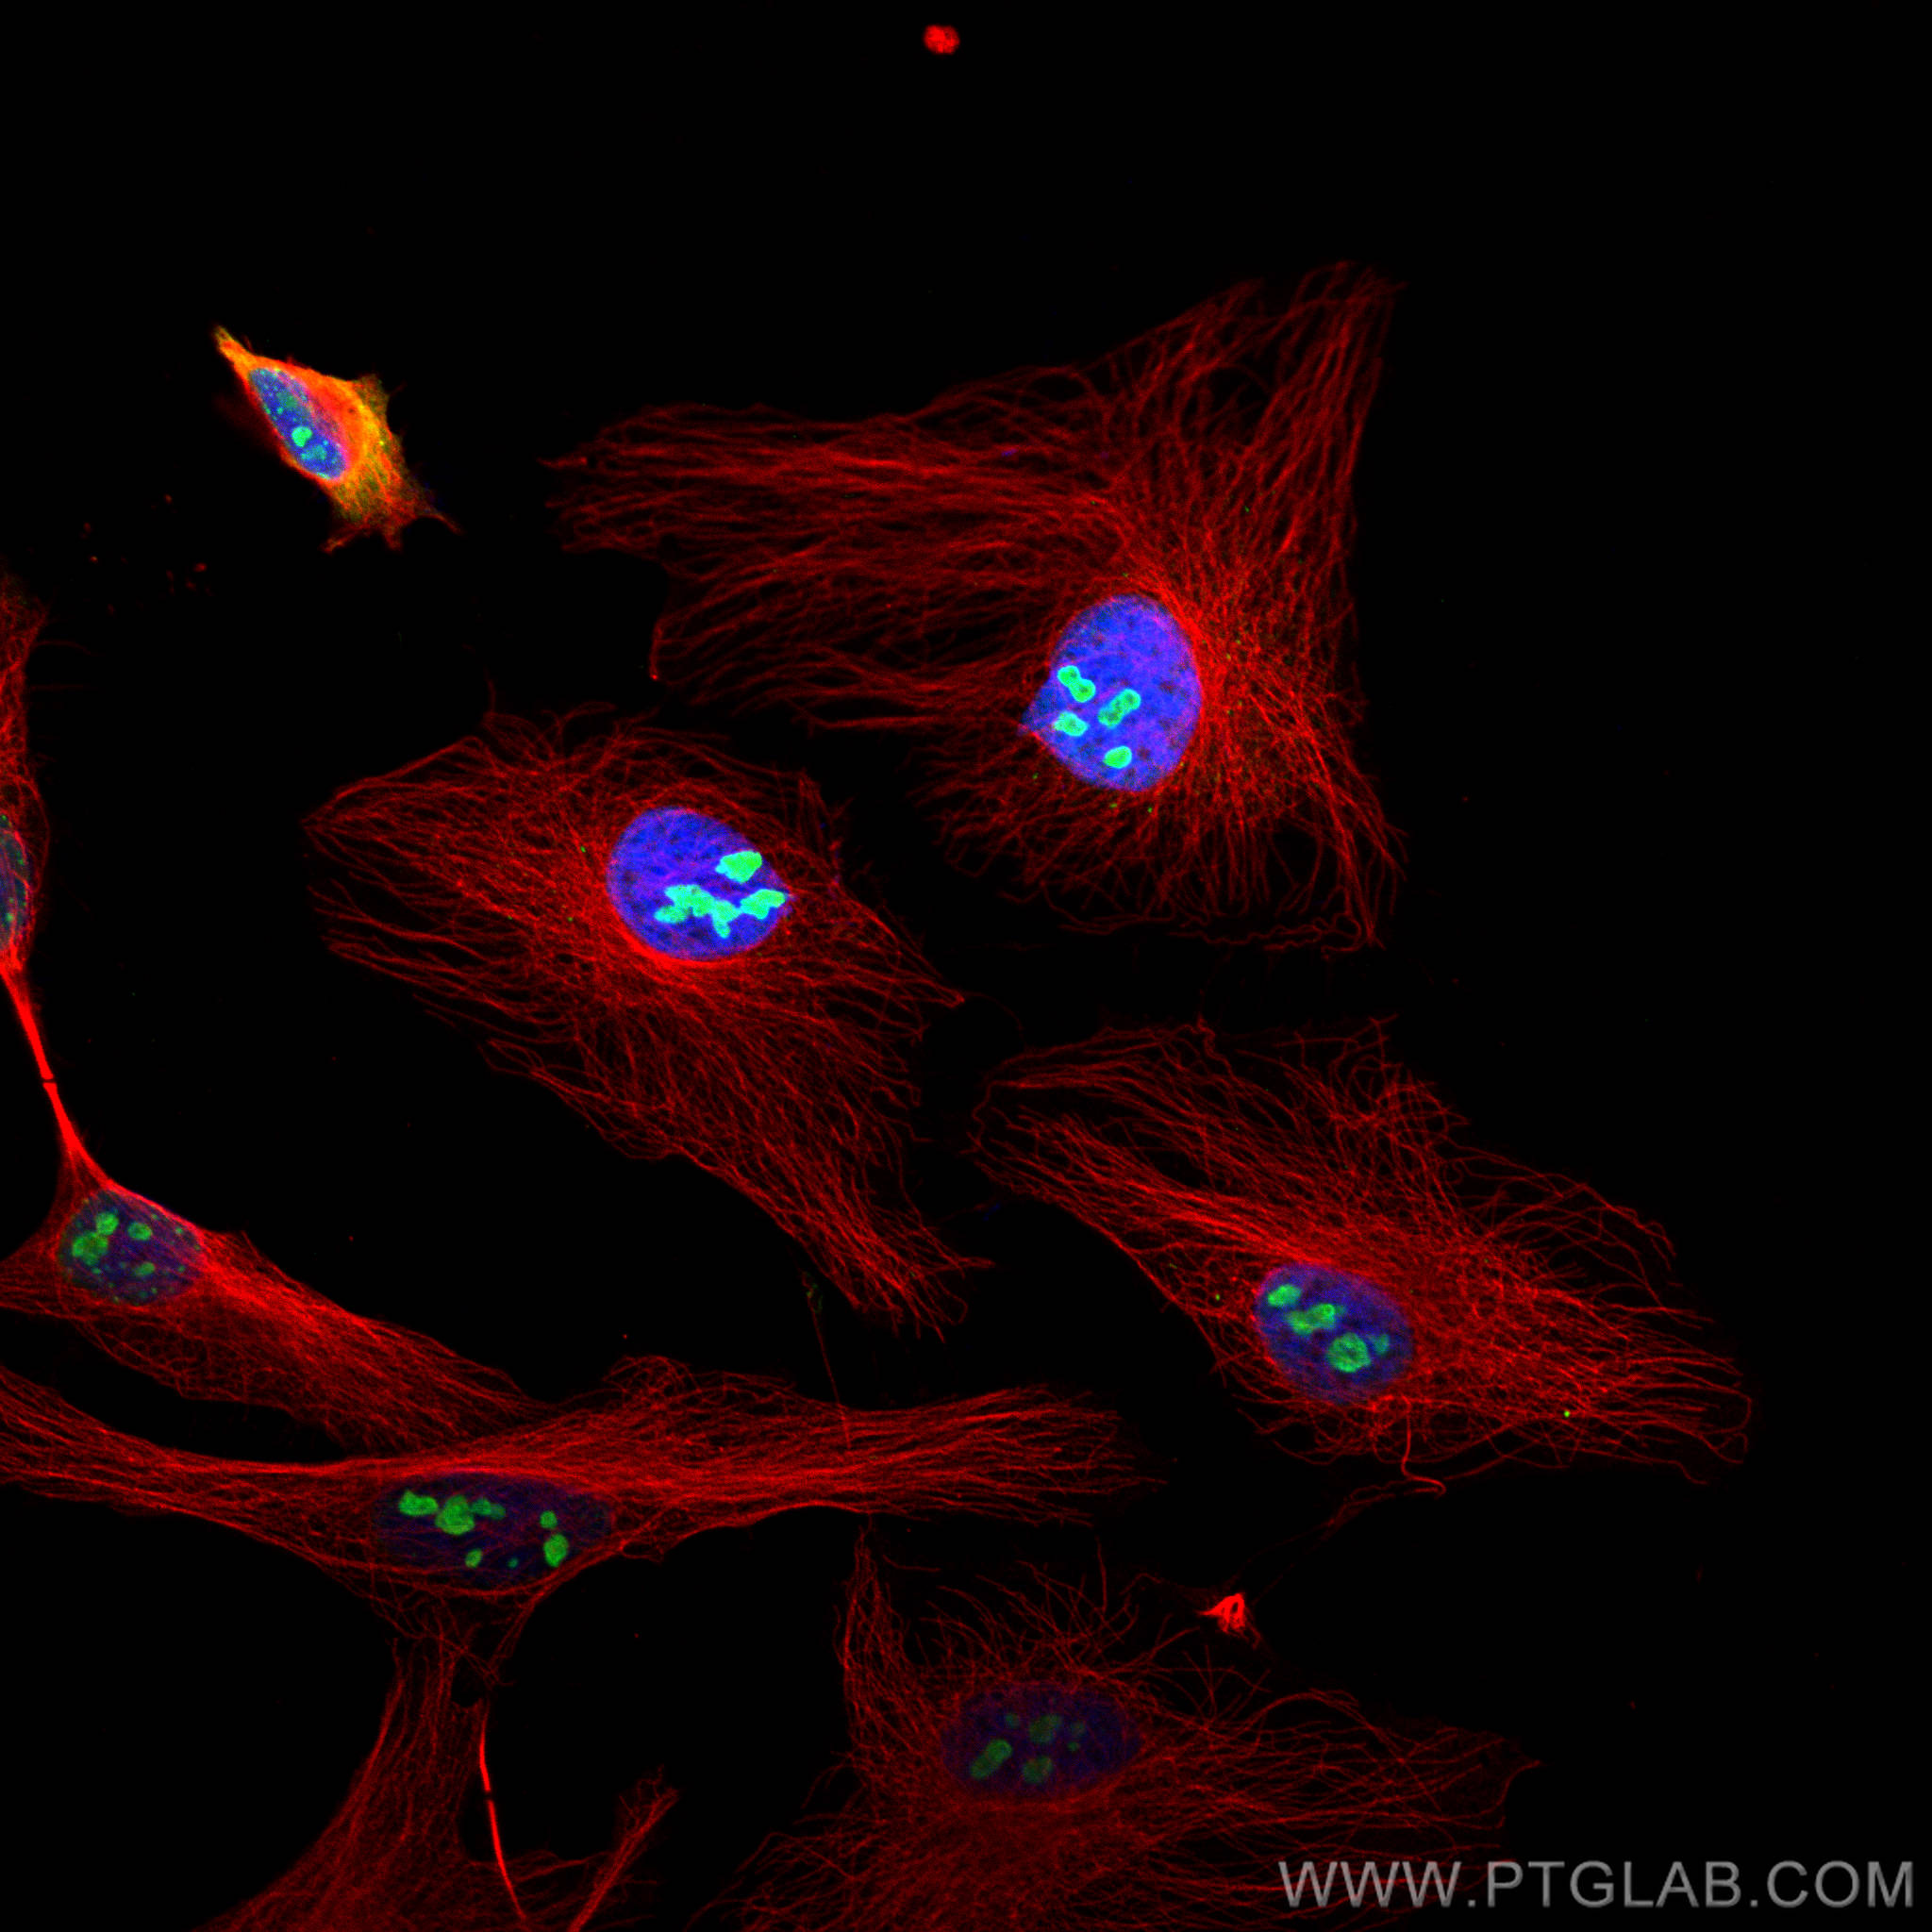 Immunofluorescence of Hela cells: Hela cells were fixed with 4% PFA and stained with Rabbit anti-Alpha Tubulin polyclonal antibody (11224-1-AP, 1:200, red) and mouse anti-NPM1 monoclonal antibody (60096-1-Ig, 1:1000, green). Multi-rAb CoraLite® Plus 594-Goat Anti-Rabbit Recombinant Secondary Antibody (H+L) (RGAR004, 1:500) and Multi-rAb CoraLite® Plus 488-Goat Anti-Mouse Recombinant Secondary Antibody (H+L) (RGAM002, 1:500) were used for detection. 